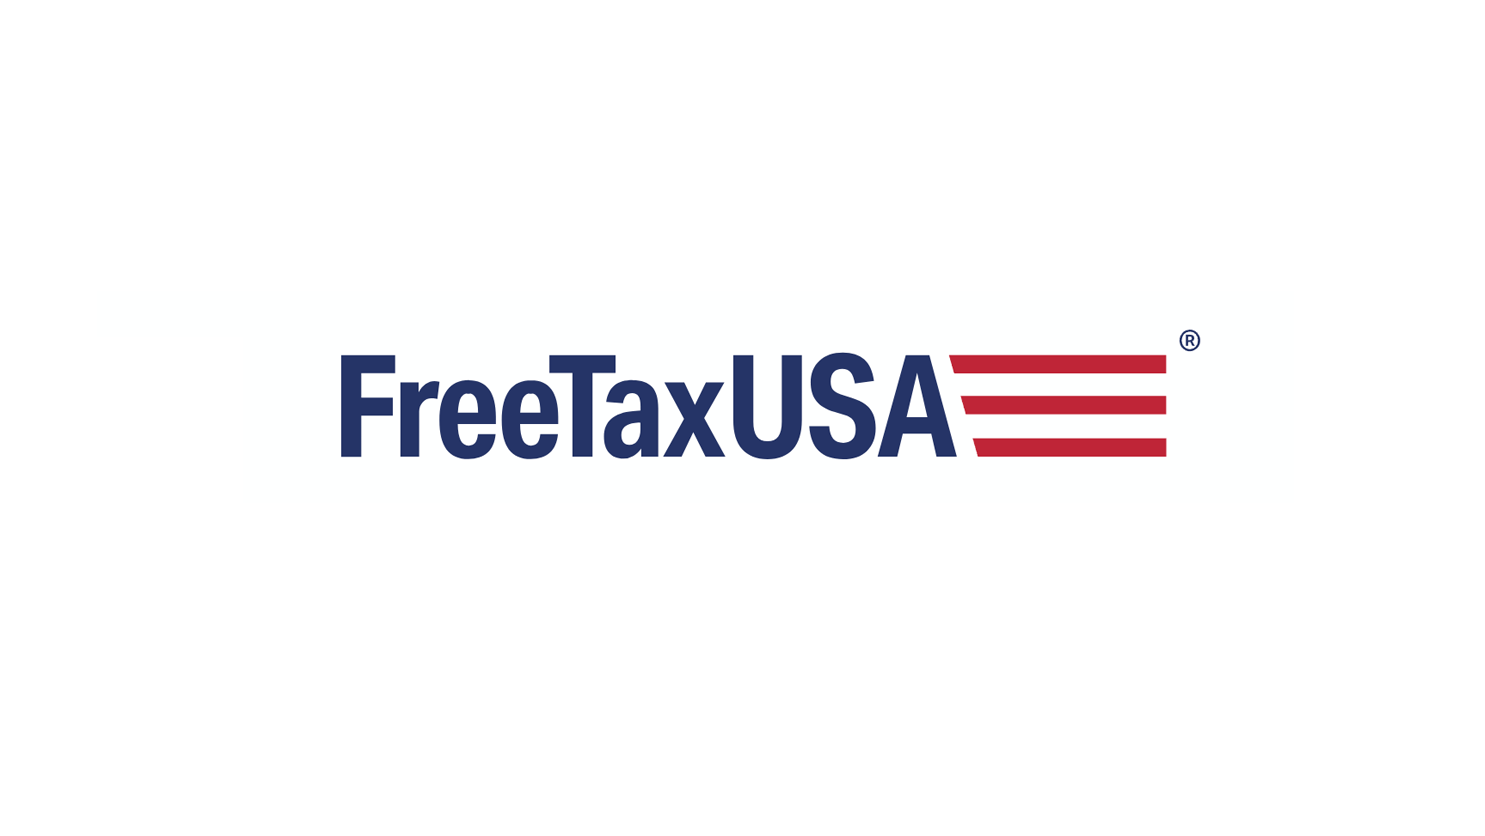 See what are the benefits of the Free Tax USA. Source: FreeTaxUSA.